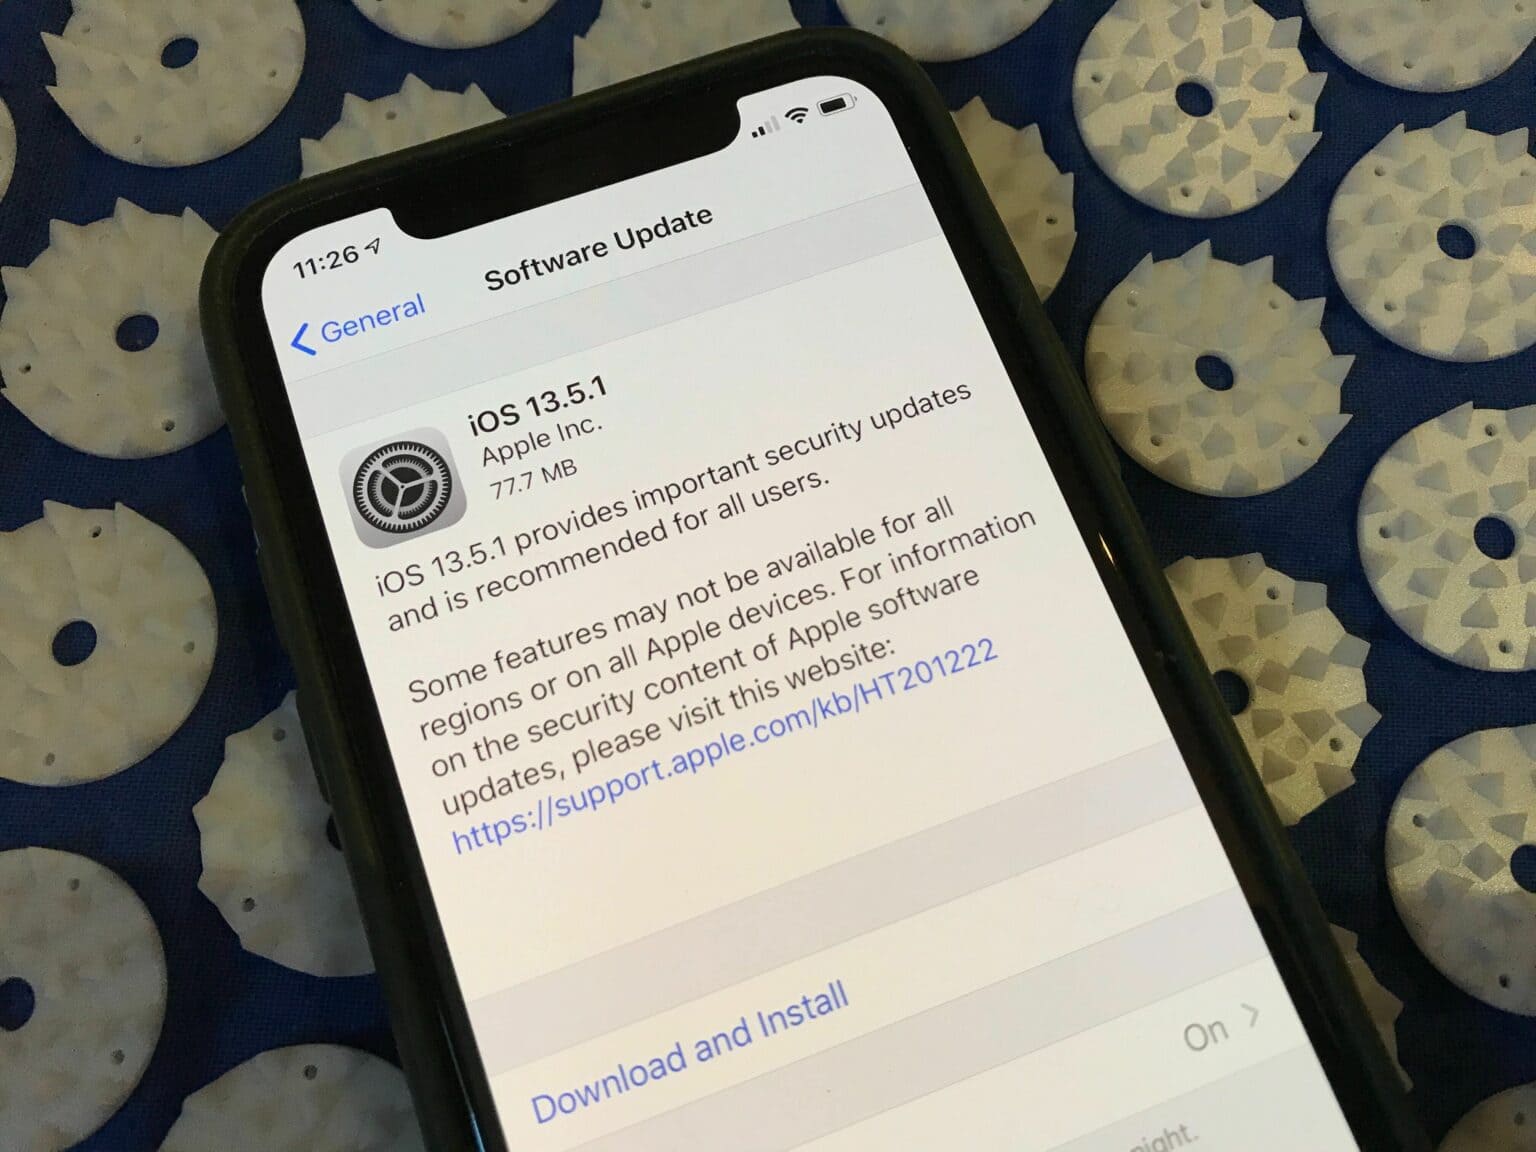 The iOS 13.5.1 update brings important security fixes.